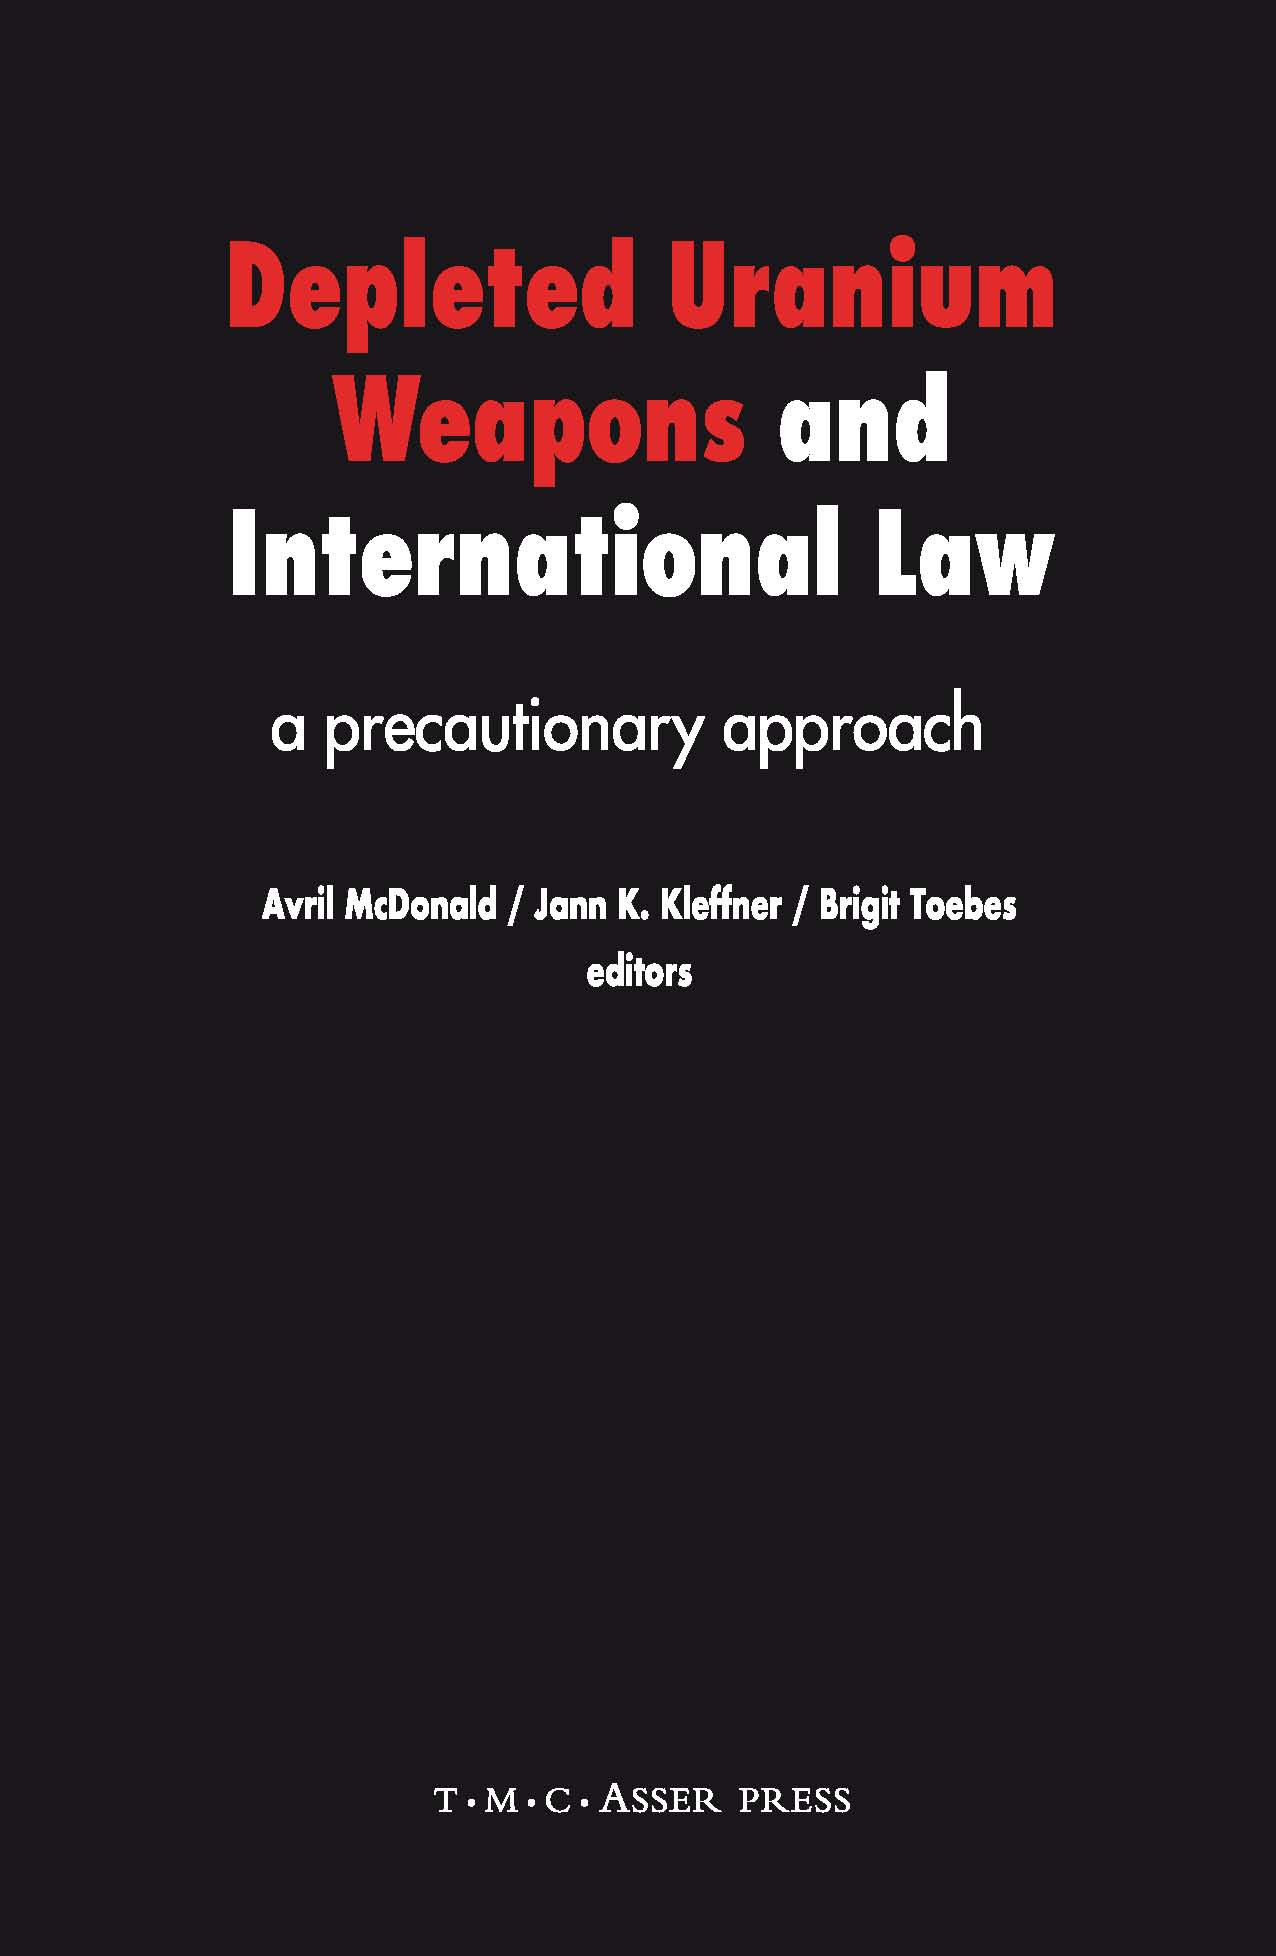 Depleted Uranium Weapons and International Law - A Precautionary Approach